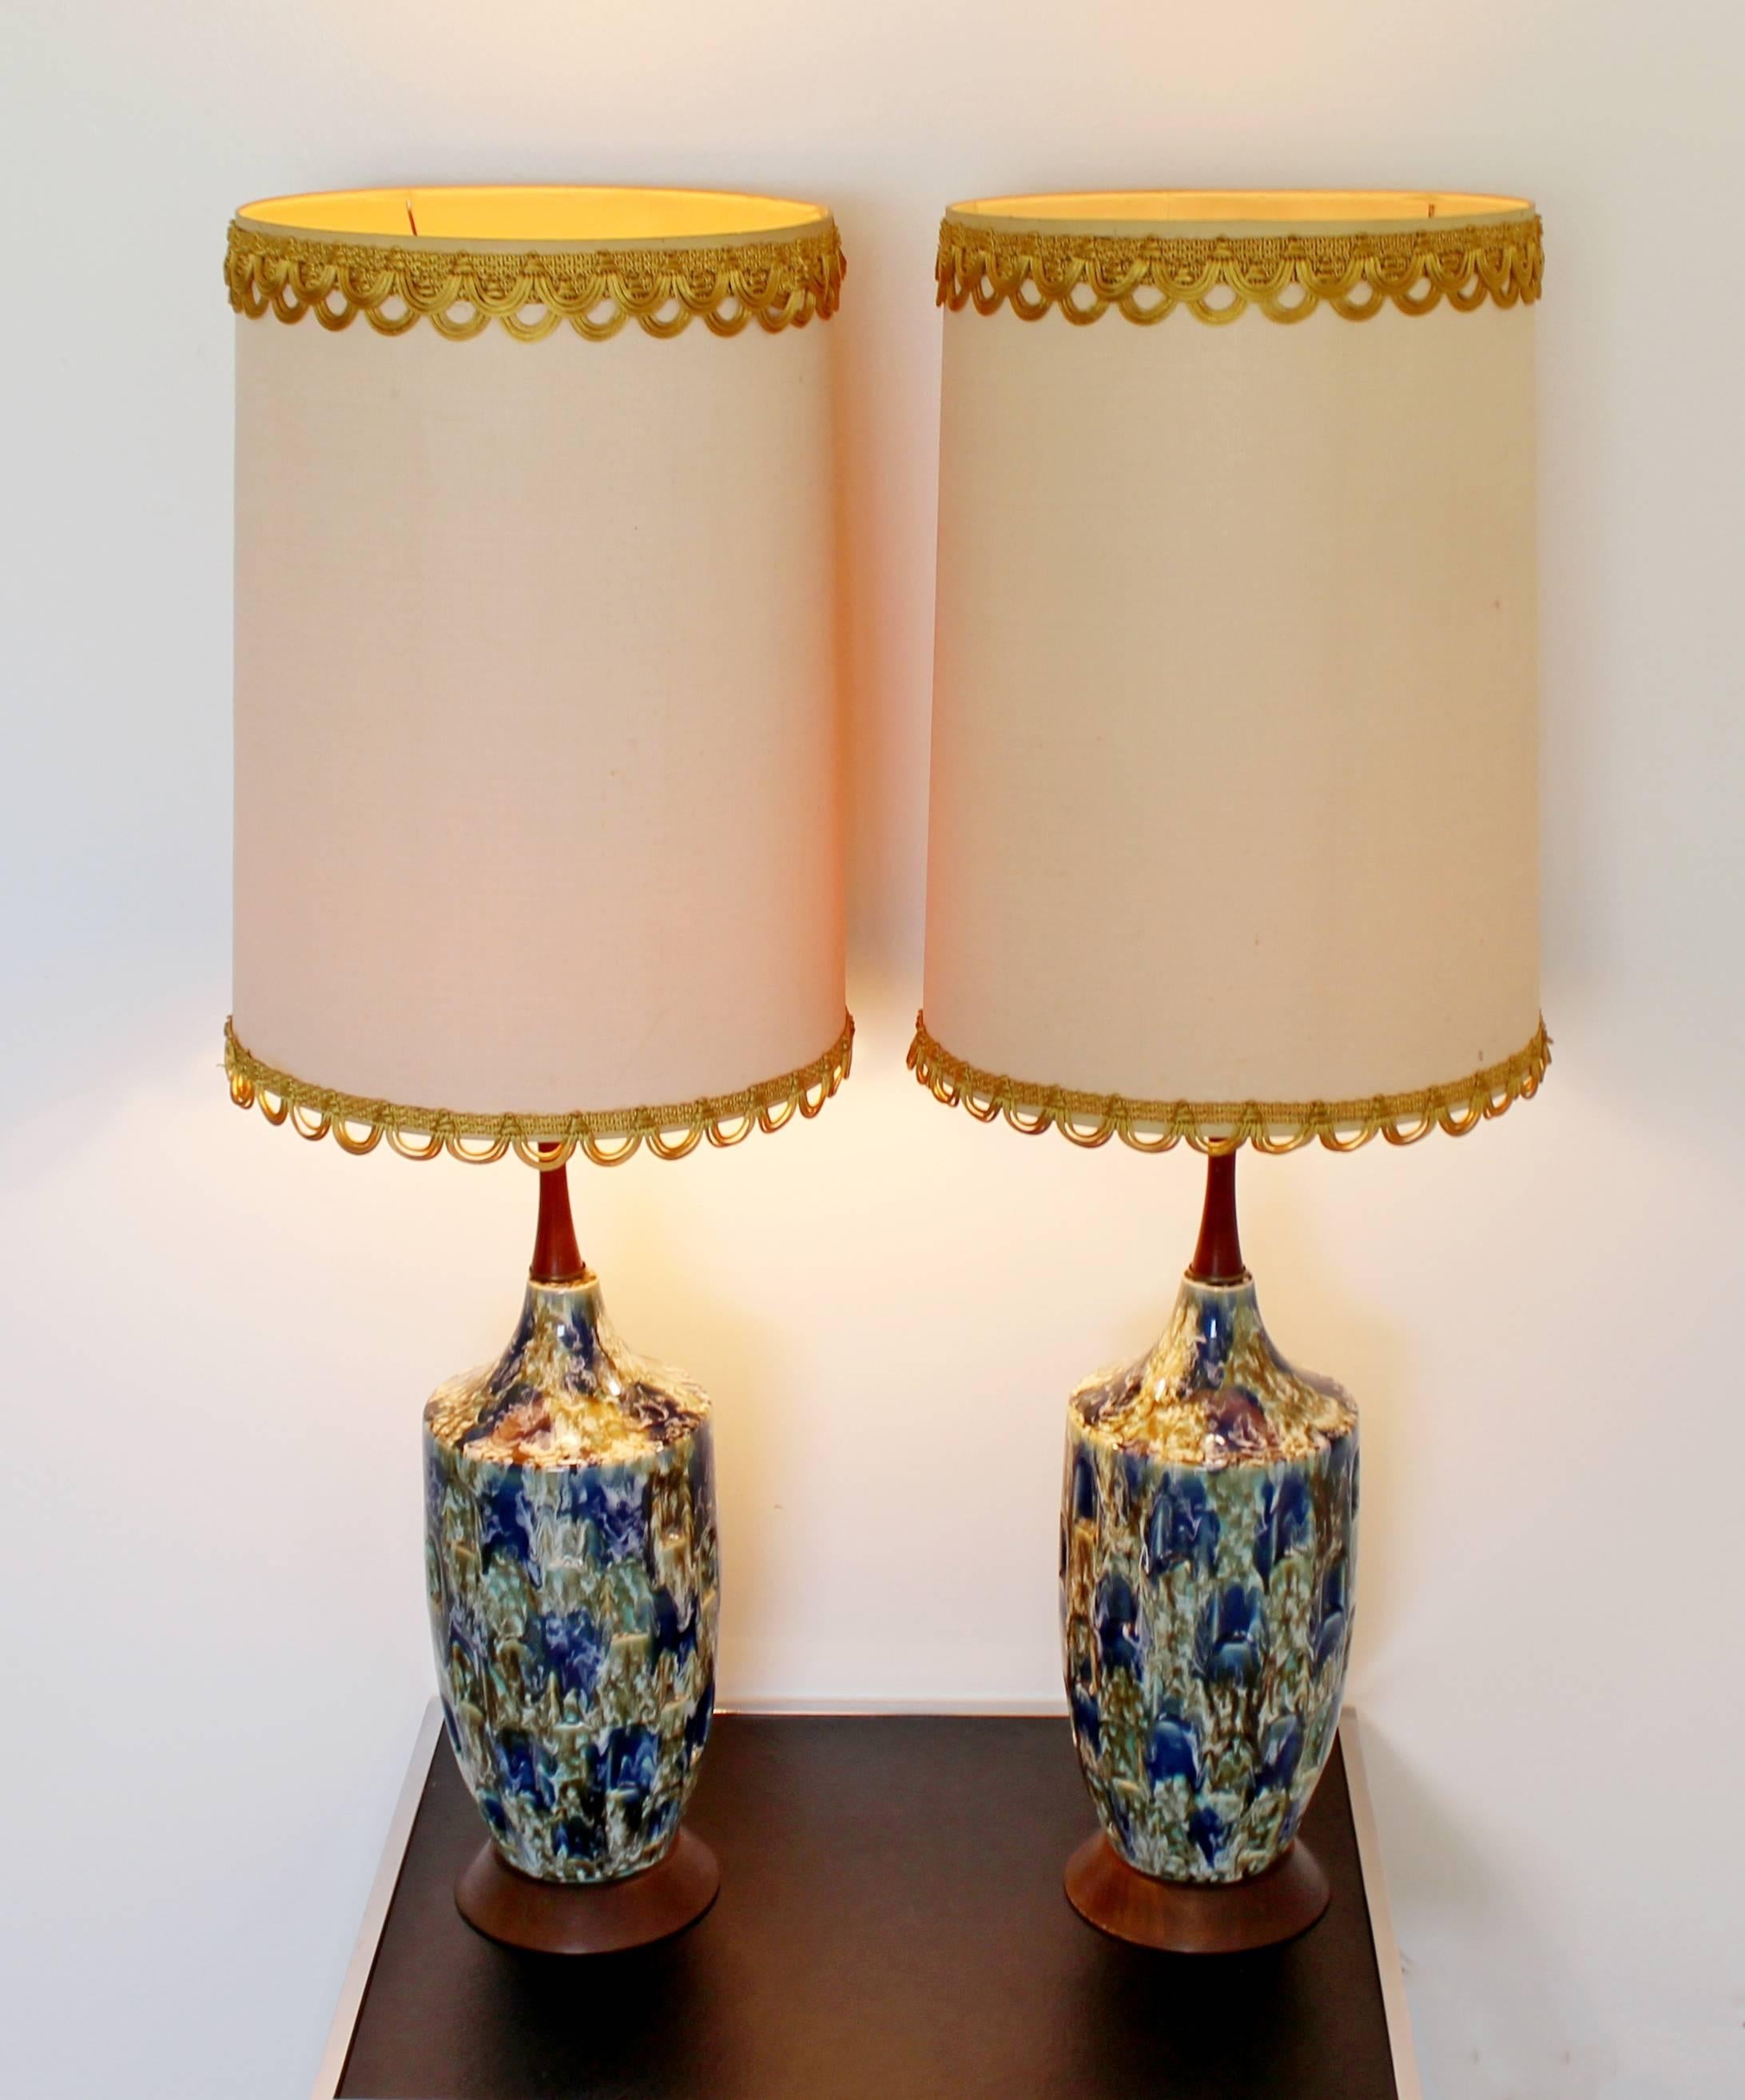 For your consideration is a phenomenal pair of blue lava drip glaze table lamps, with their original shades and finials. In excellent condition, with some staining on the shades. The dimensions are 14